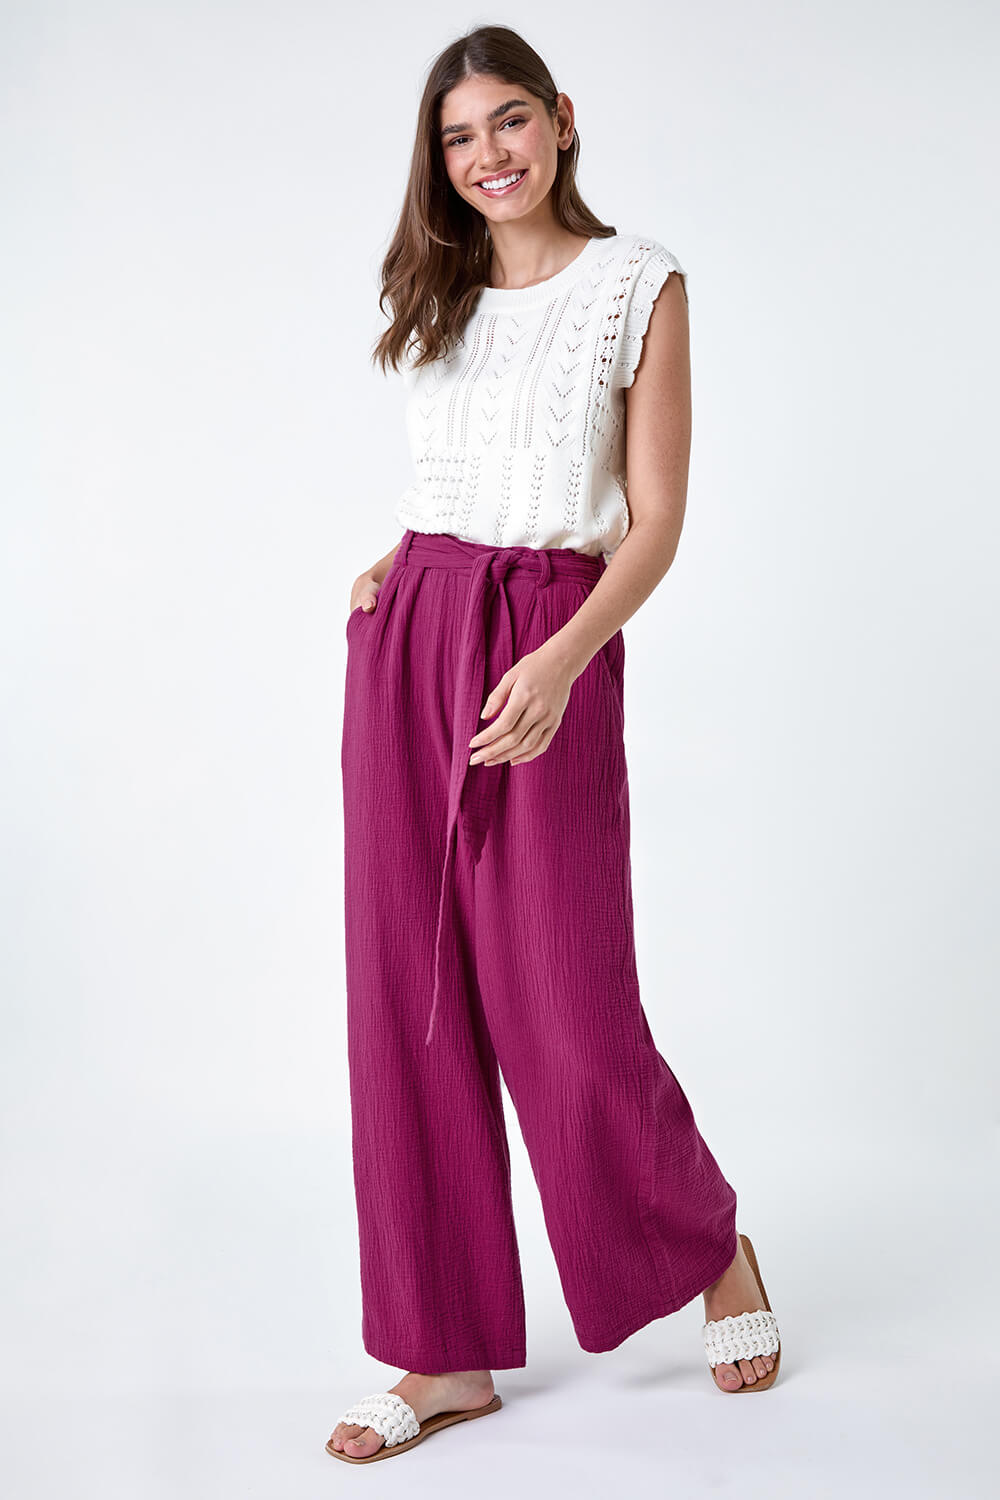 MAGENTA Textured Cotton Wide Leg Trousers, Image 2 of 5